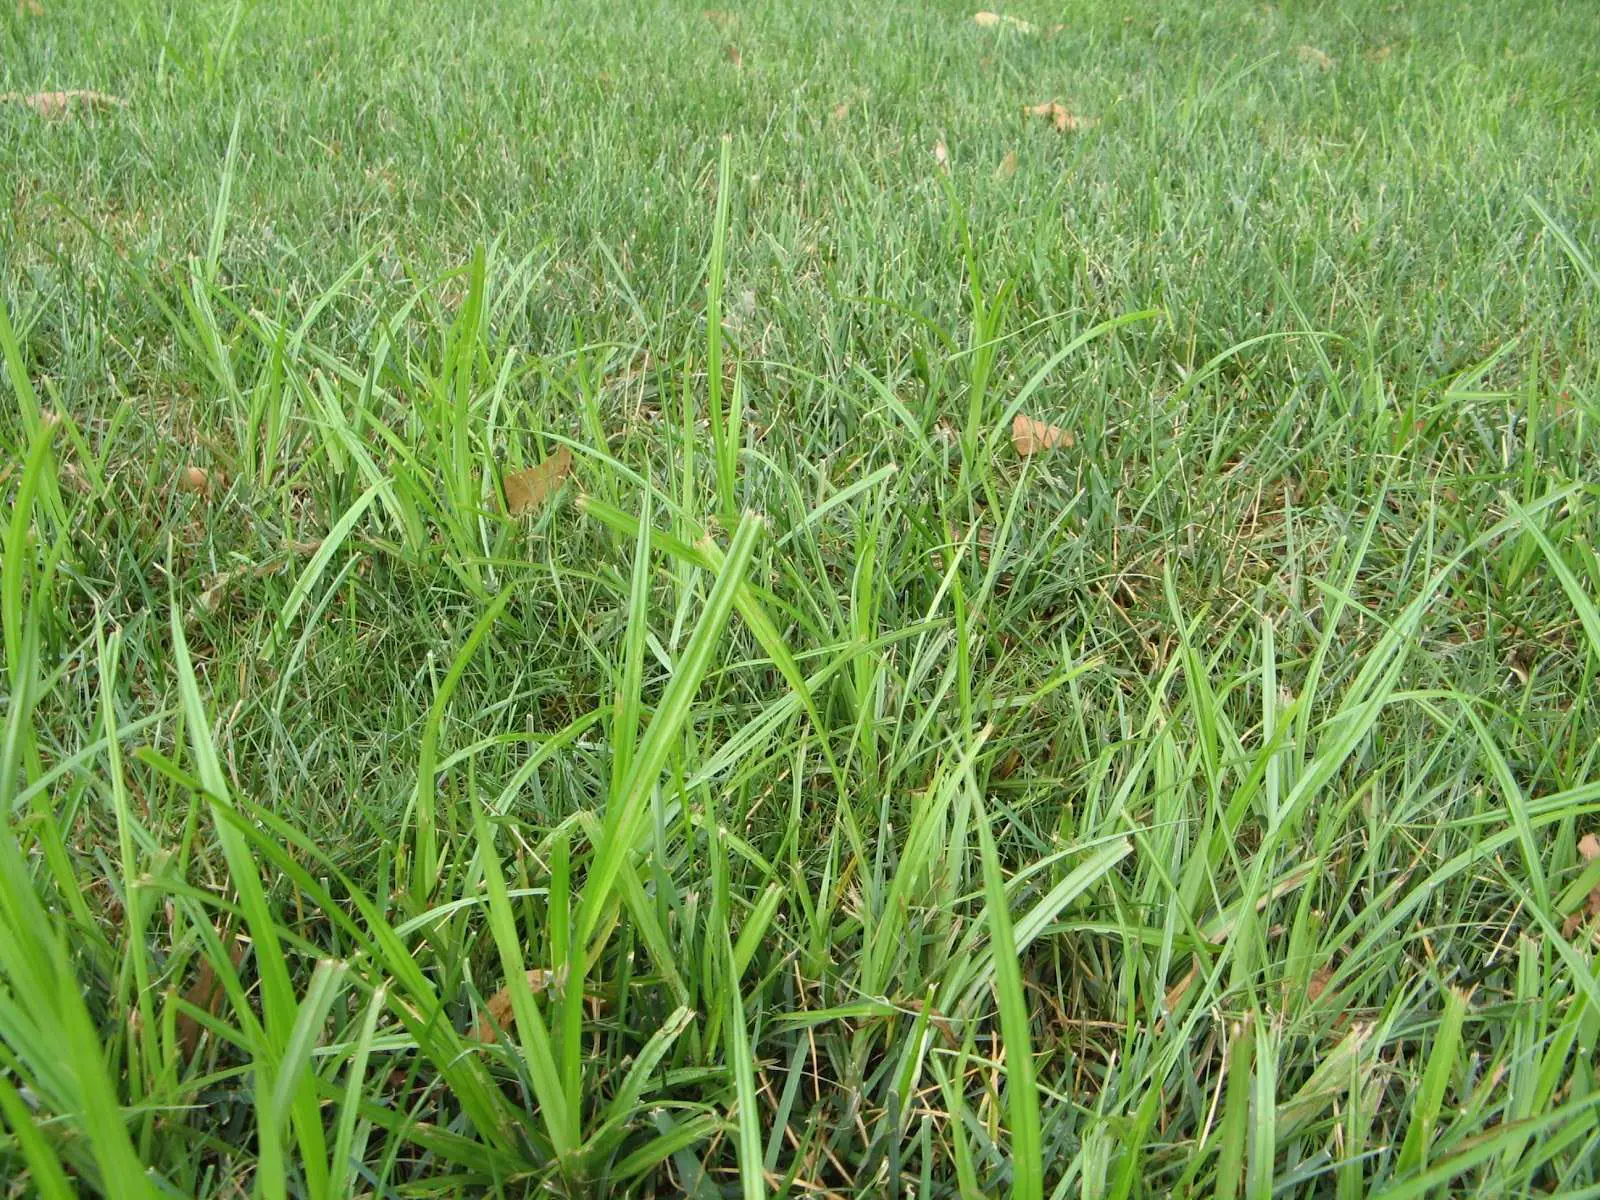 Purdue Turf Tips: Should I apply an herbicide right now?